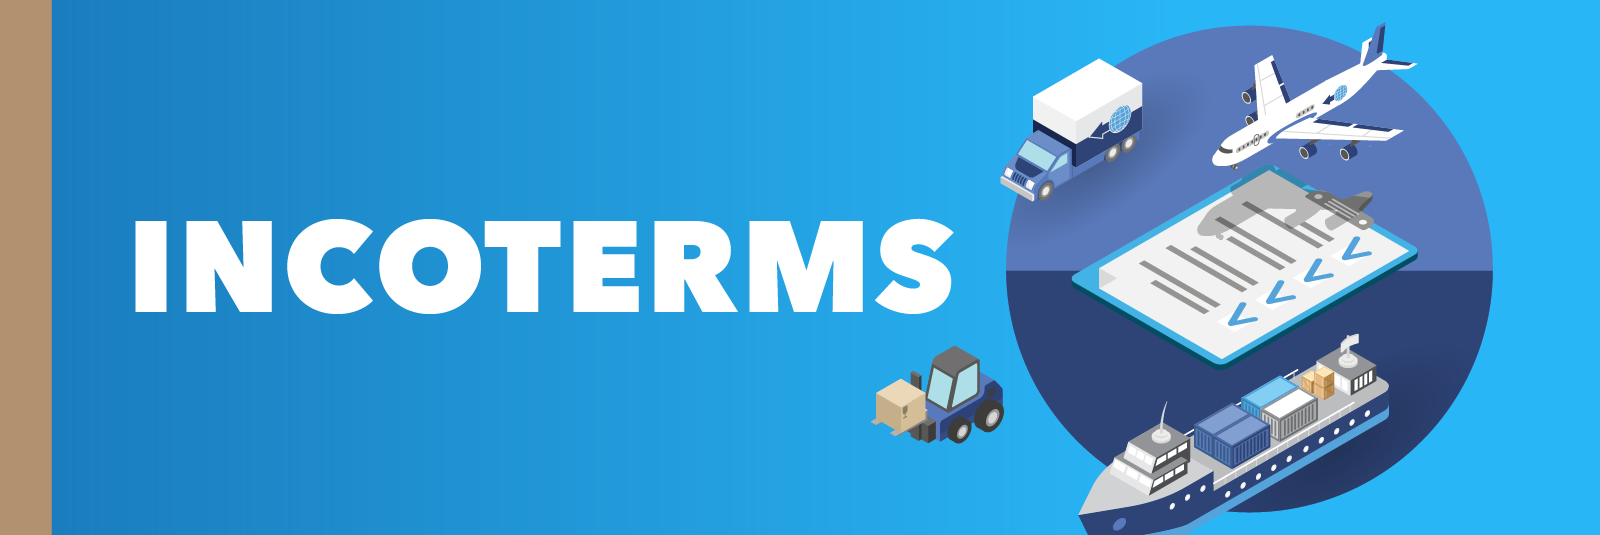 Banner for Incoterms